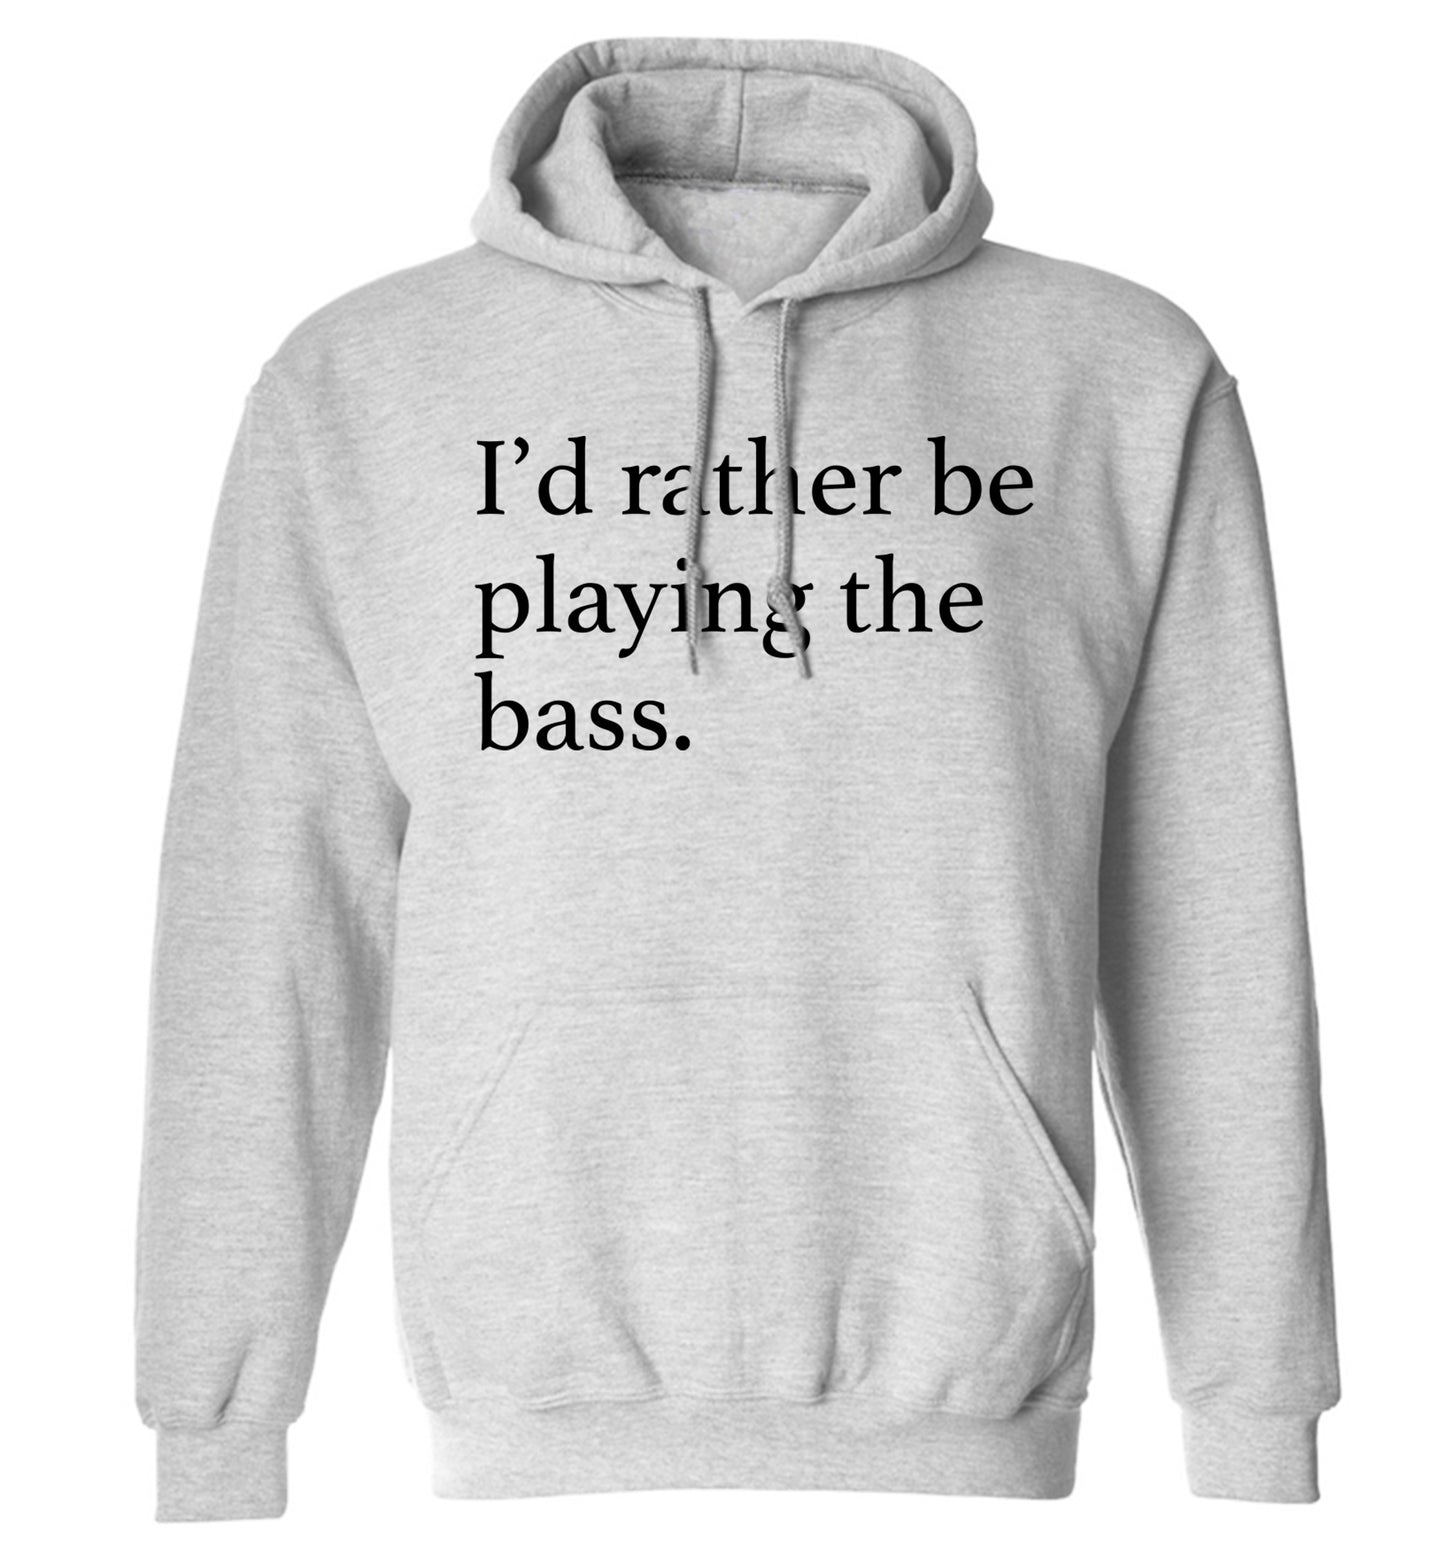 I'd rather by playing the bass adults unisex grey hoodie 2XL